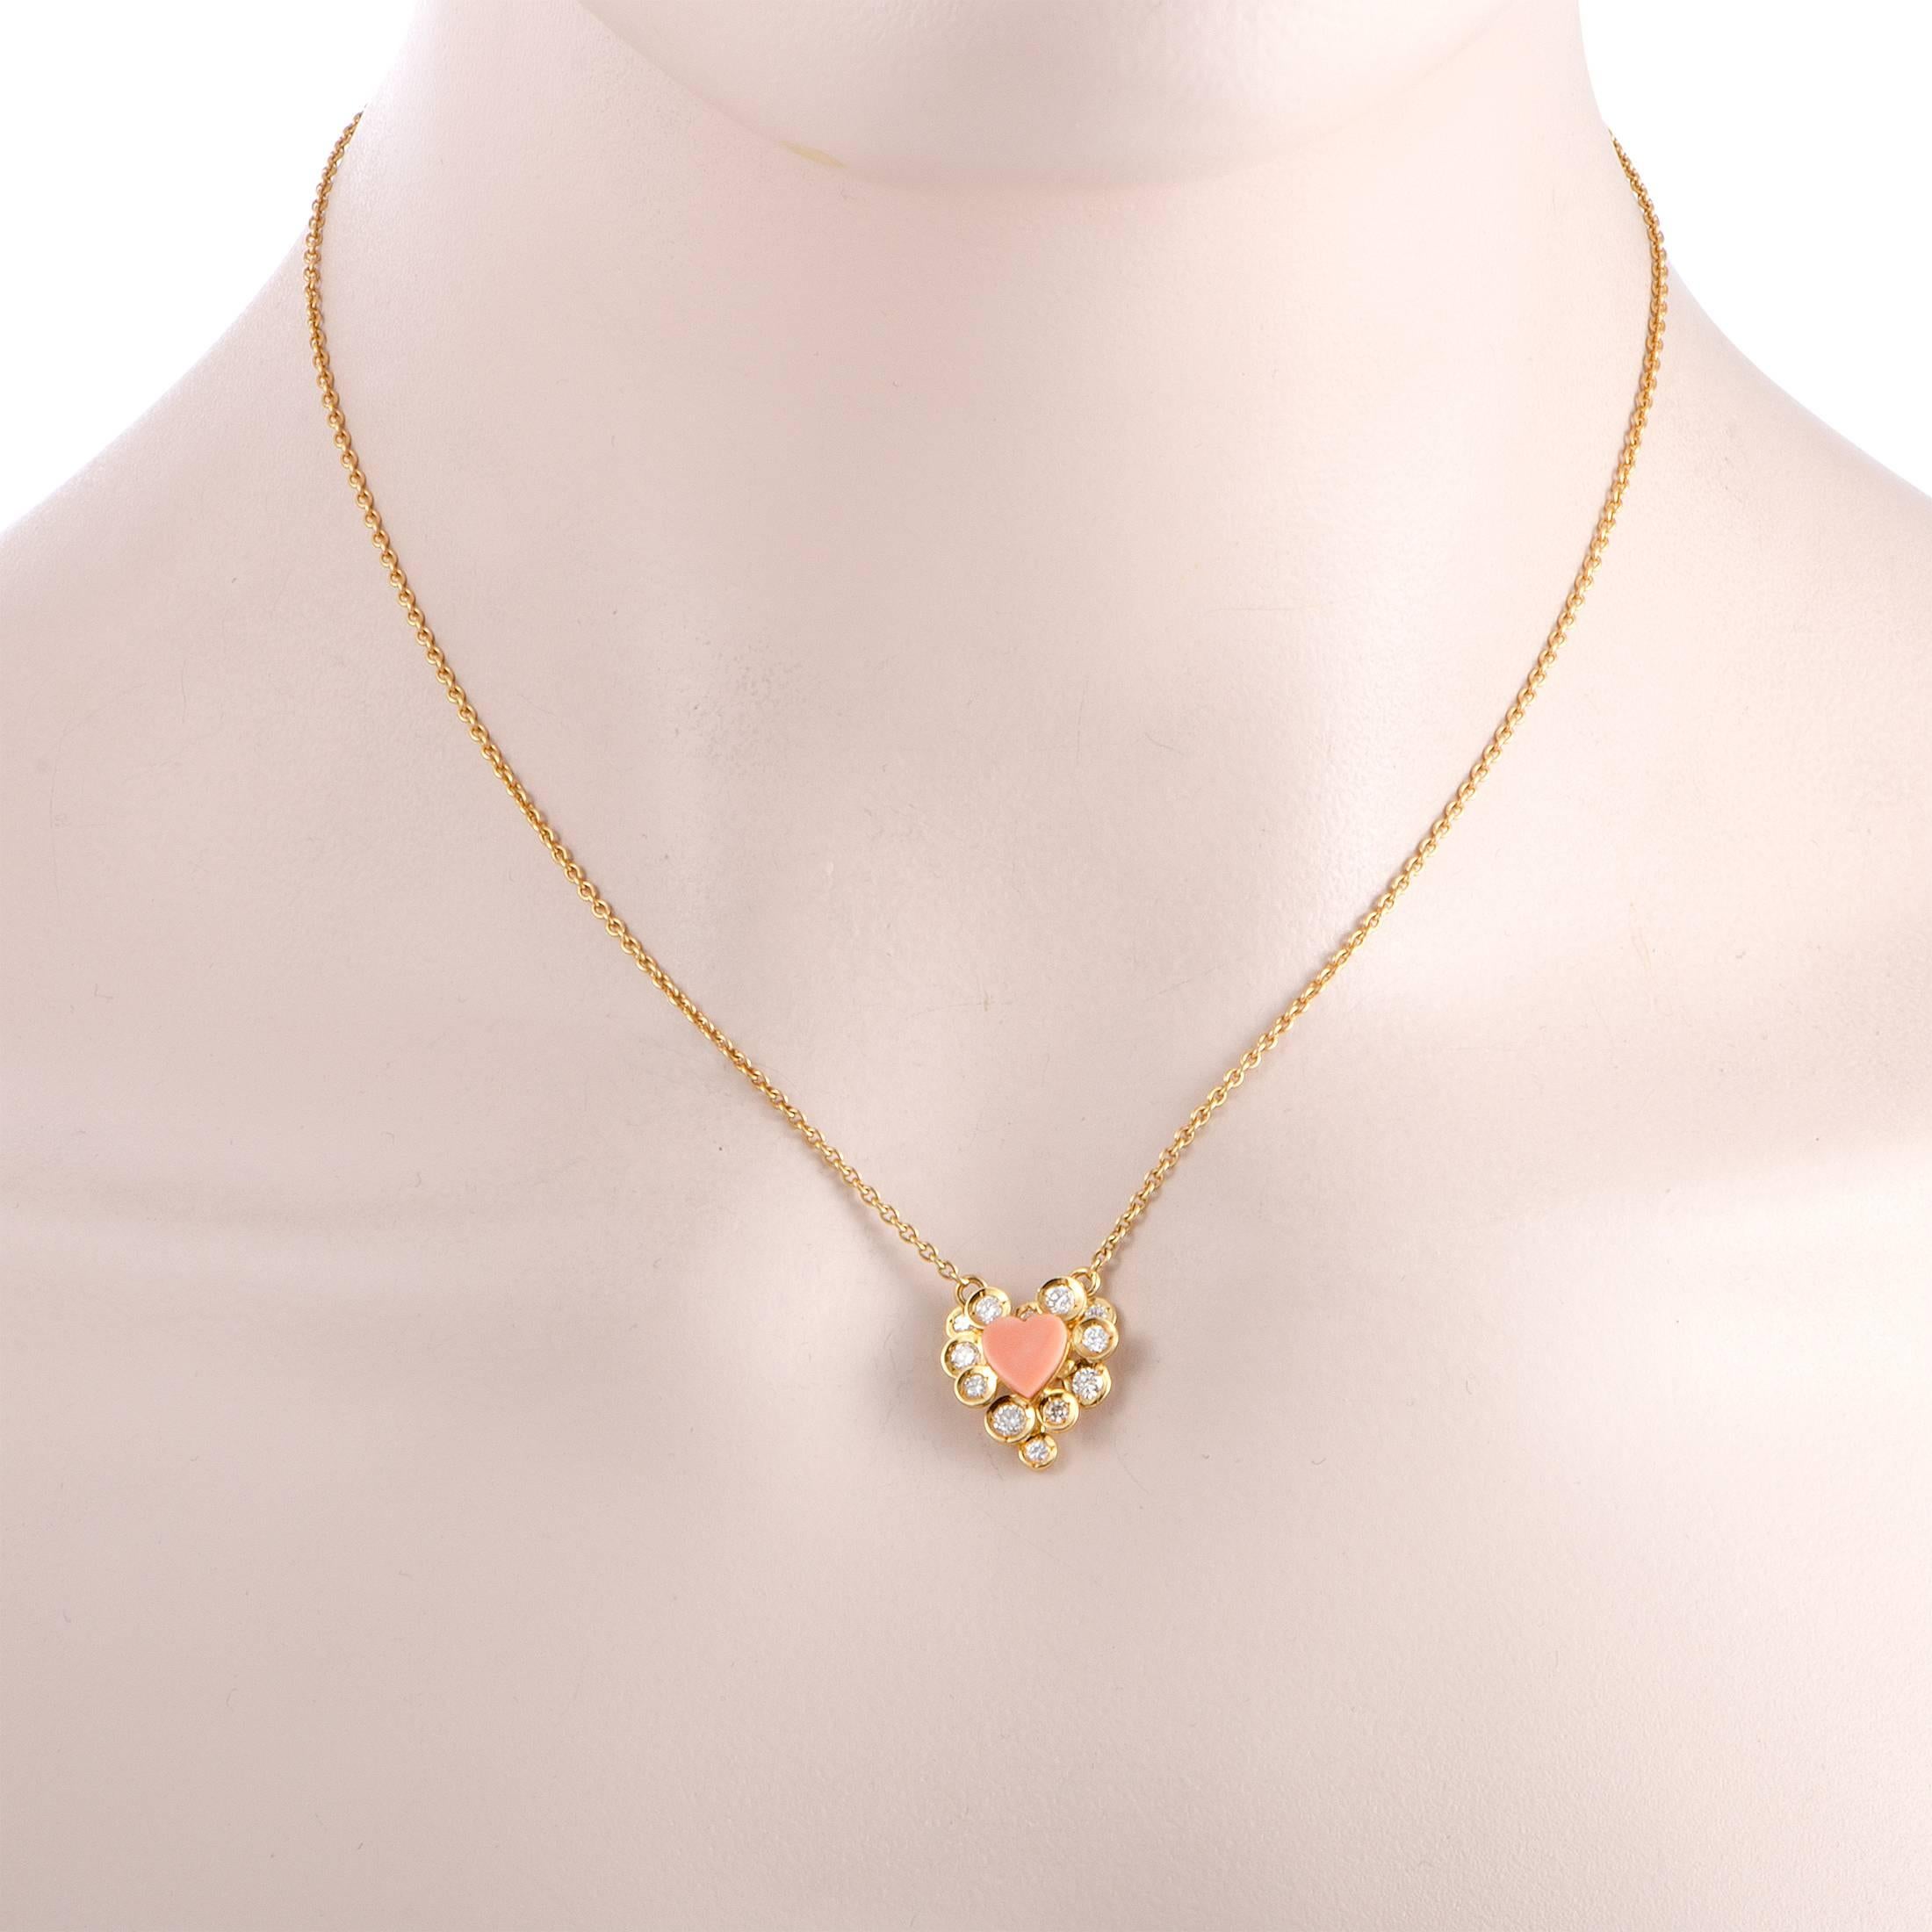 Designed by Van Cleef & Arpels, this lovely 18K yellow gold necklace is presented with a nifty chain onto which a dainty heart pendant is attached. The pendant is decorated with a sublime coral and approximately 0.50 carats of glistening diamonds of